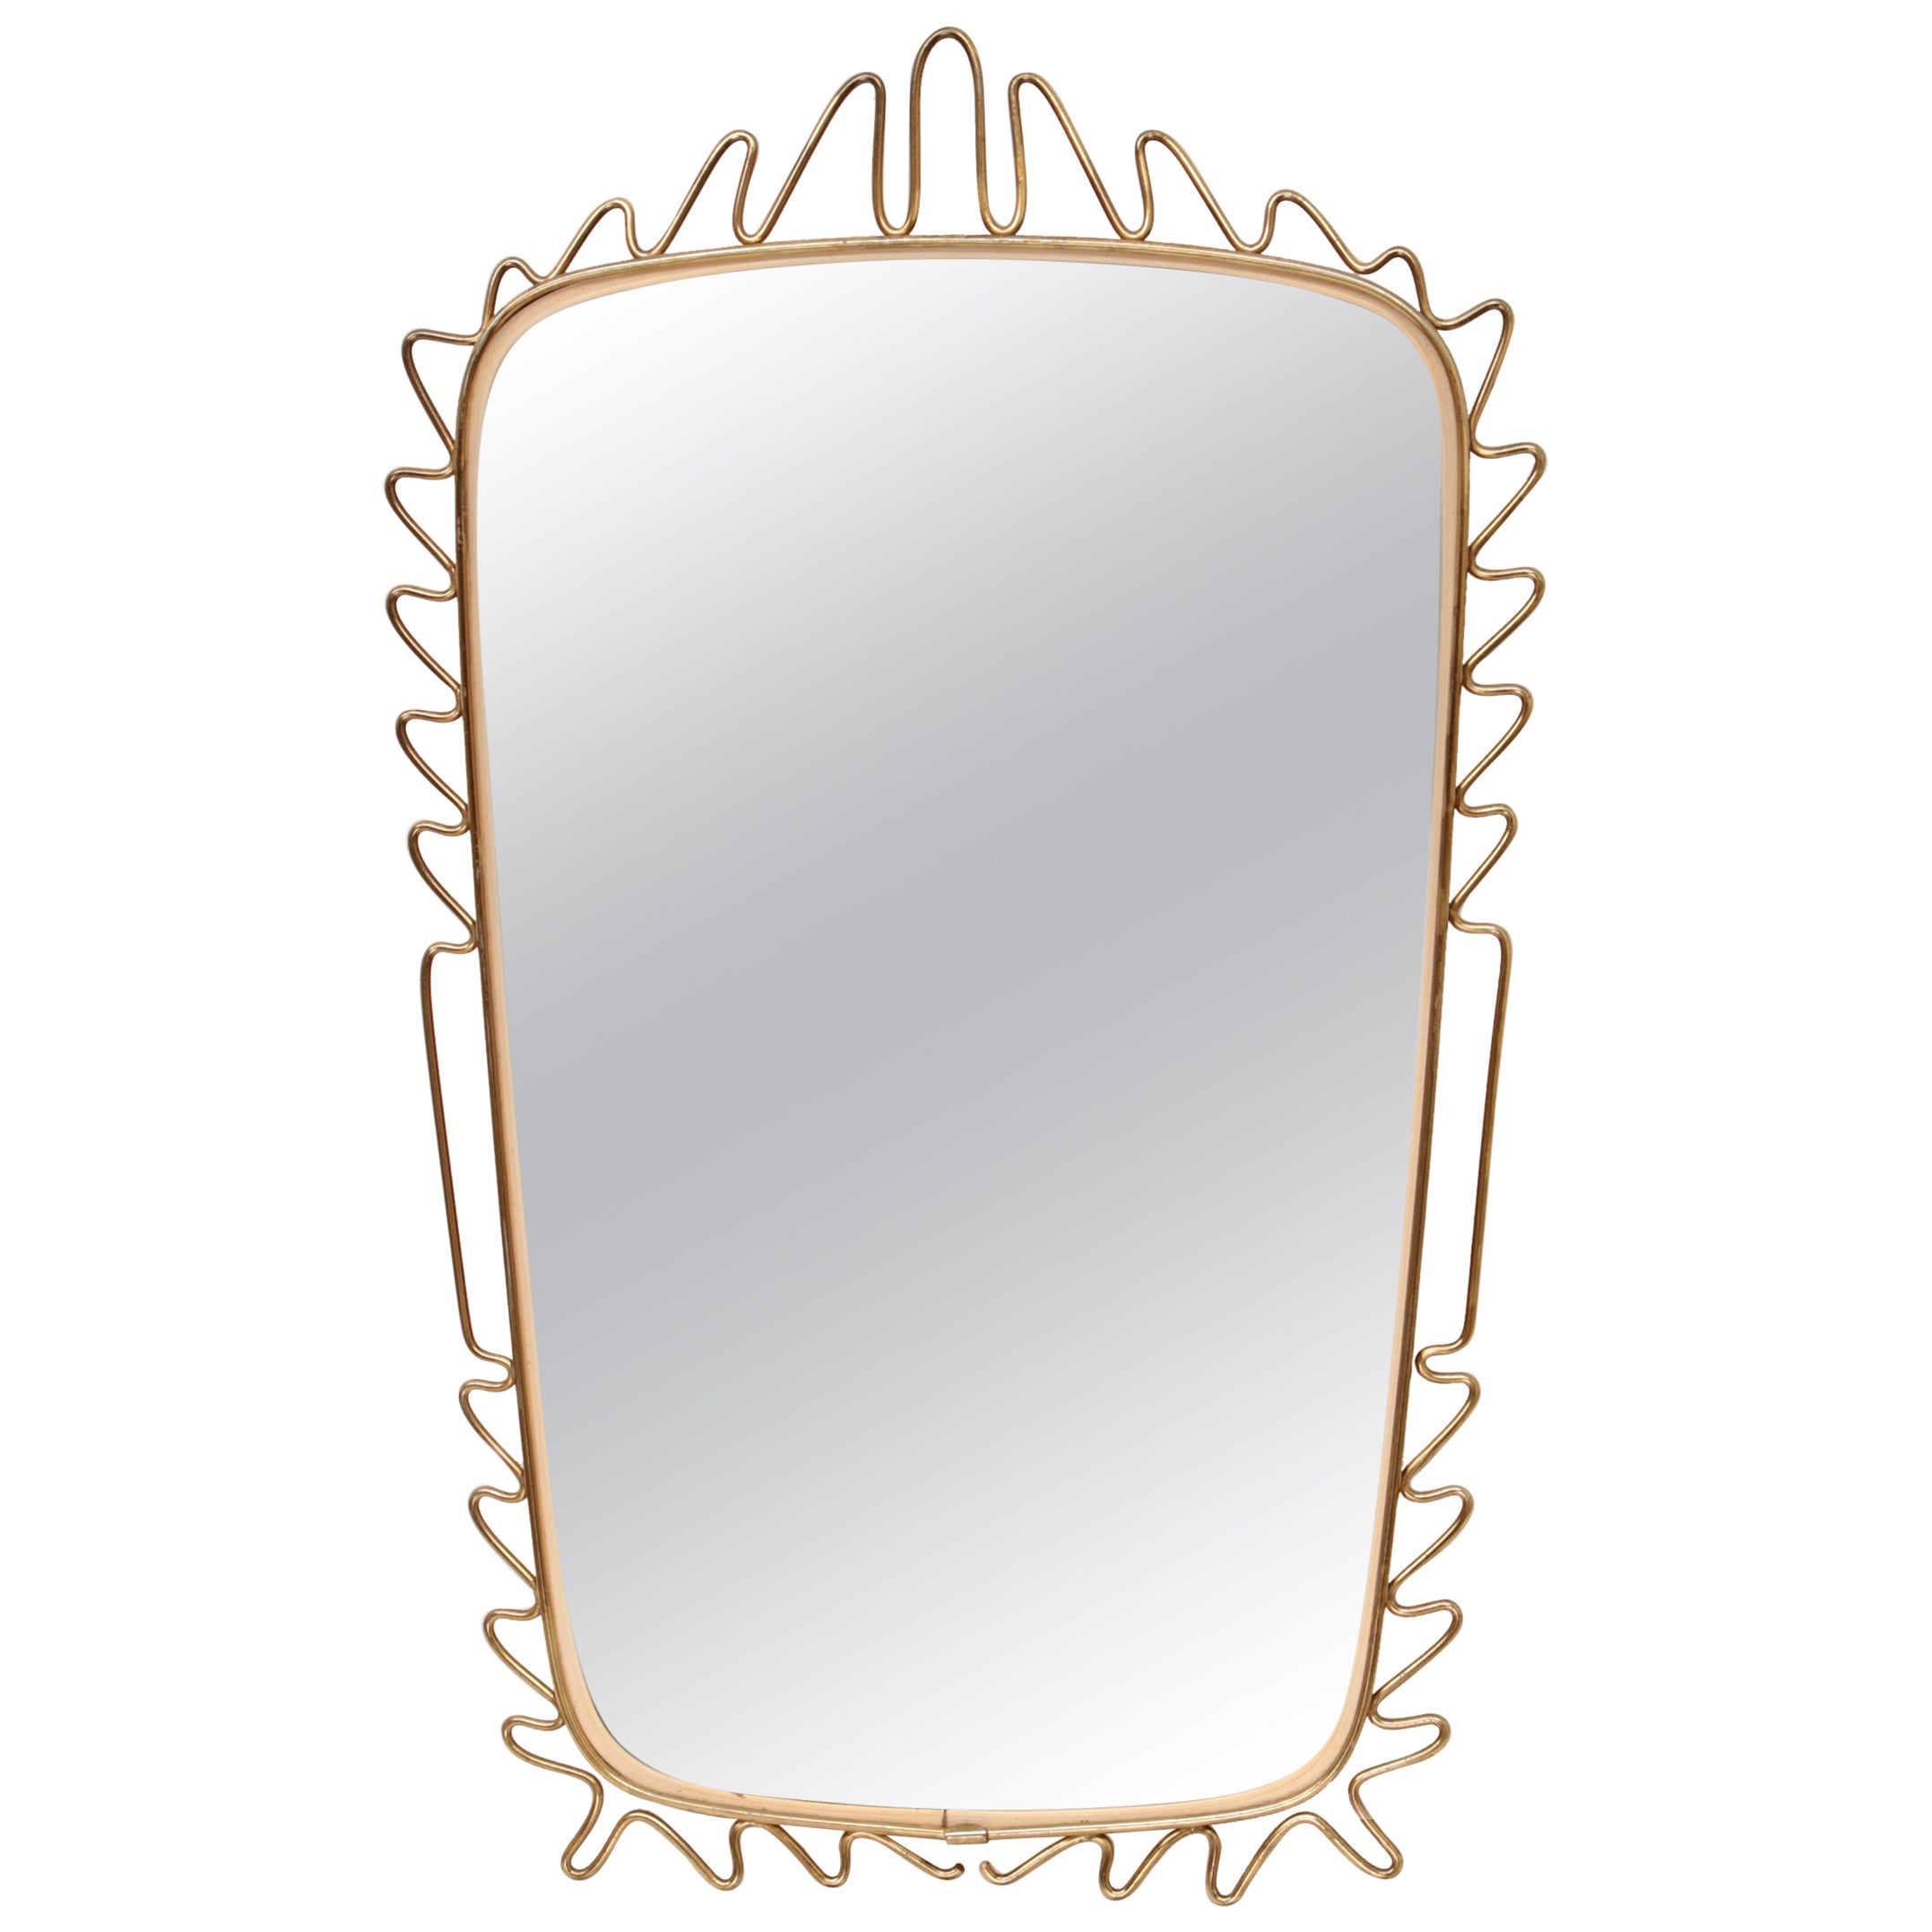 Vintage Elongated Mirror with Ornate Brass Edge, 1960s